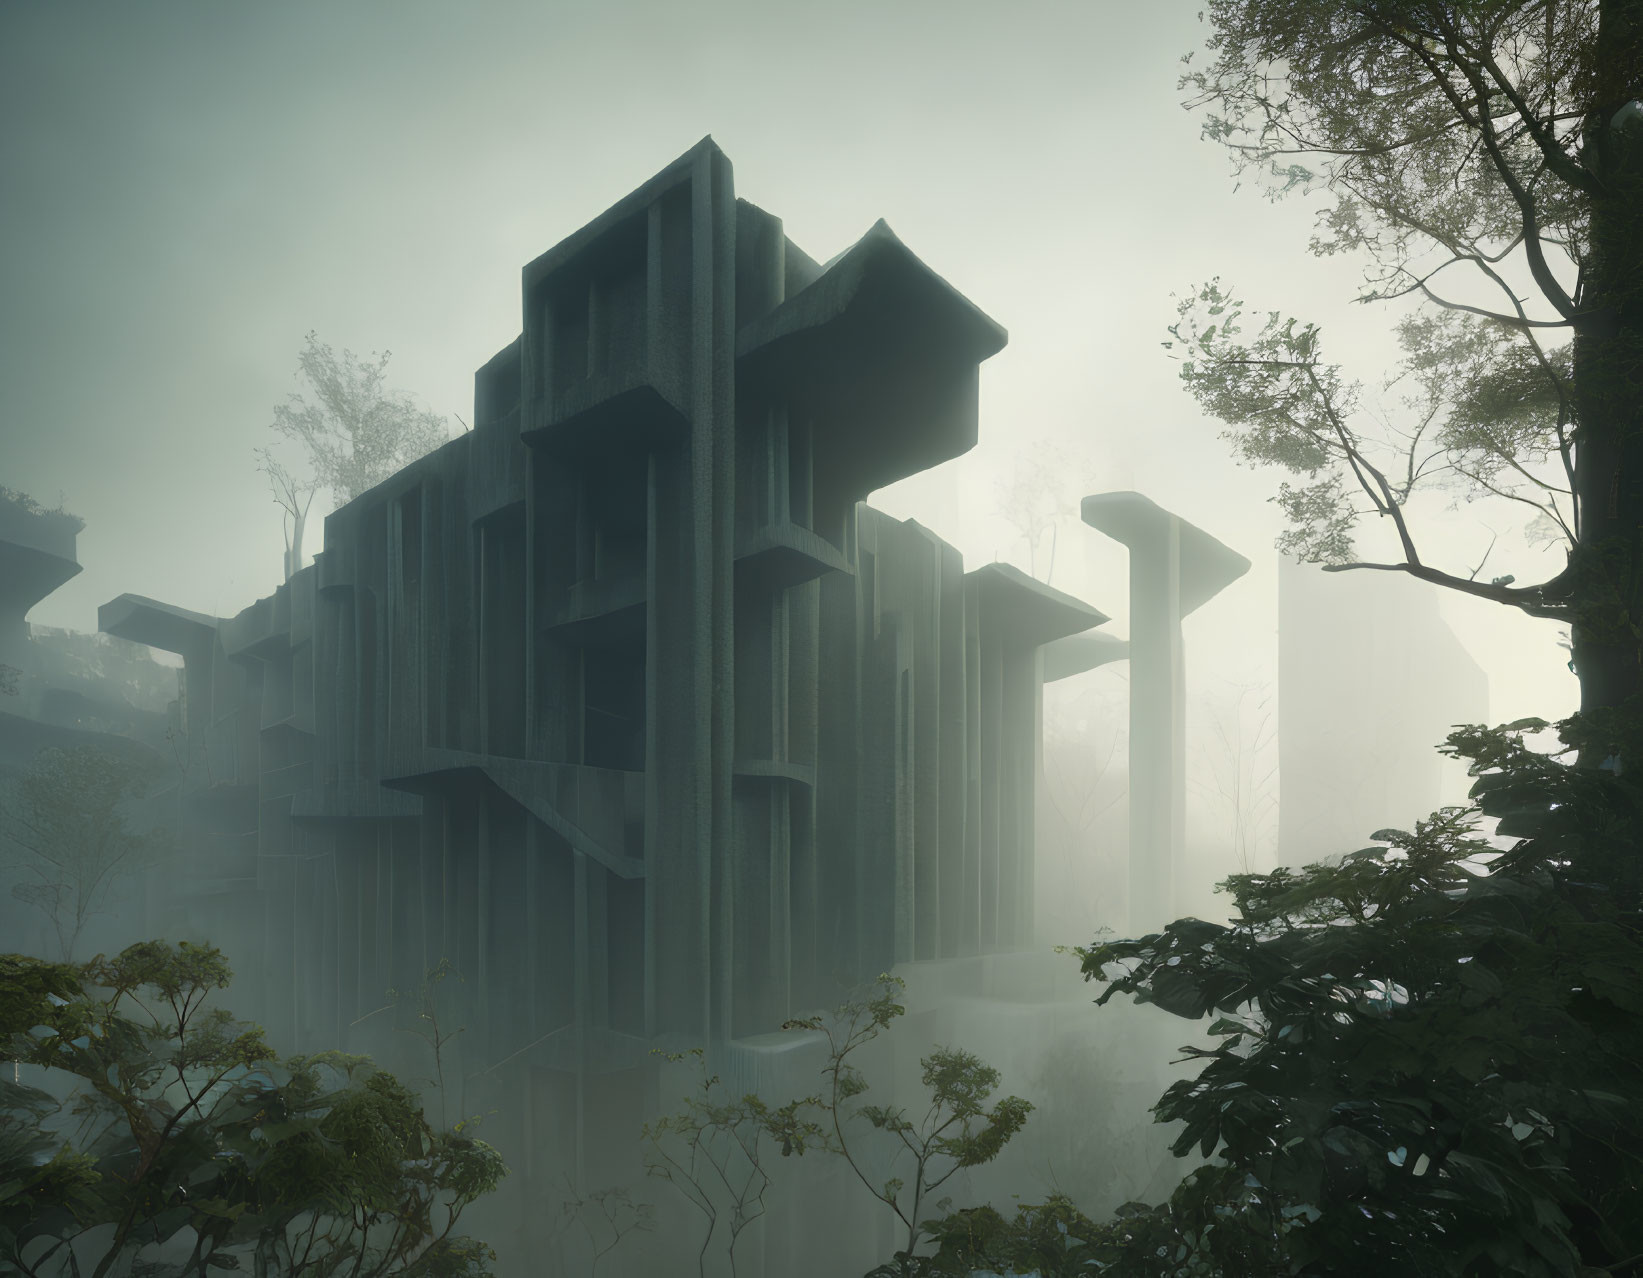 Large Brutalist-style Building in Fog Amid Lush Greenery